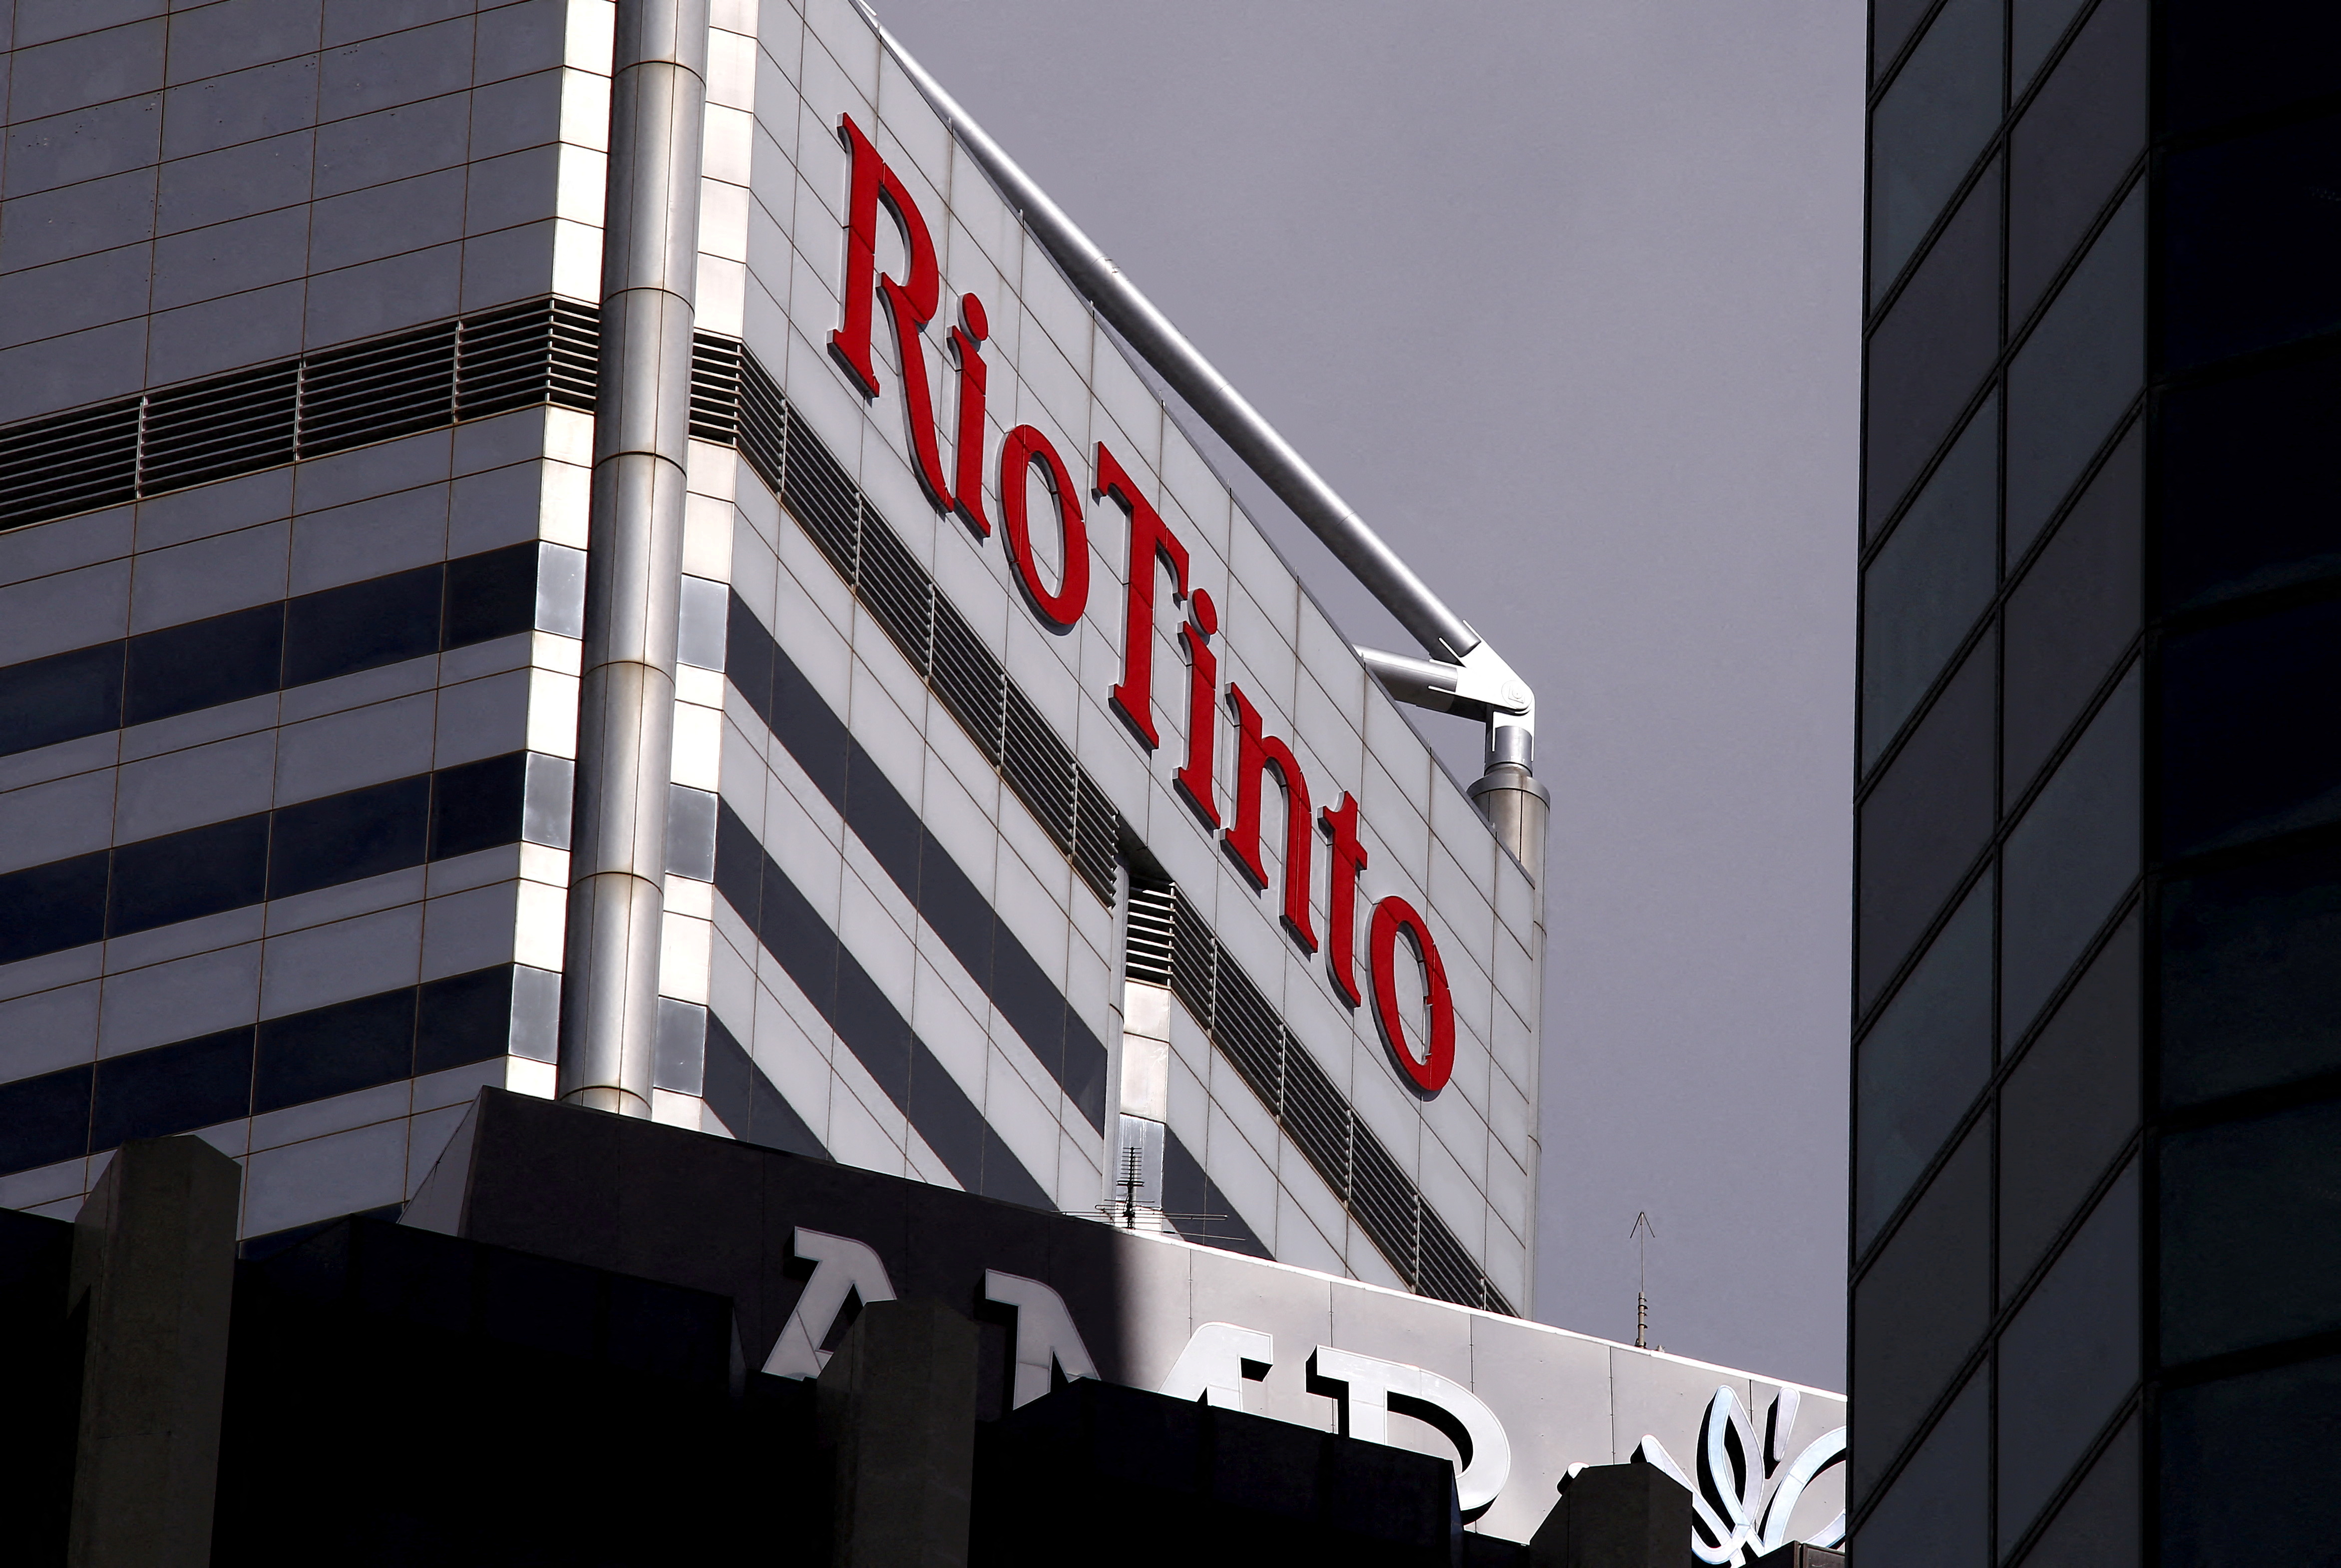 A sign adorns the building where mining company Rio Tinto has their office in Perth, Western Australia